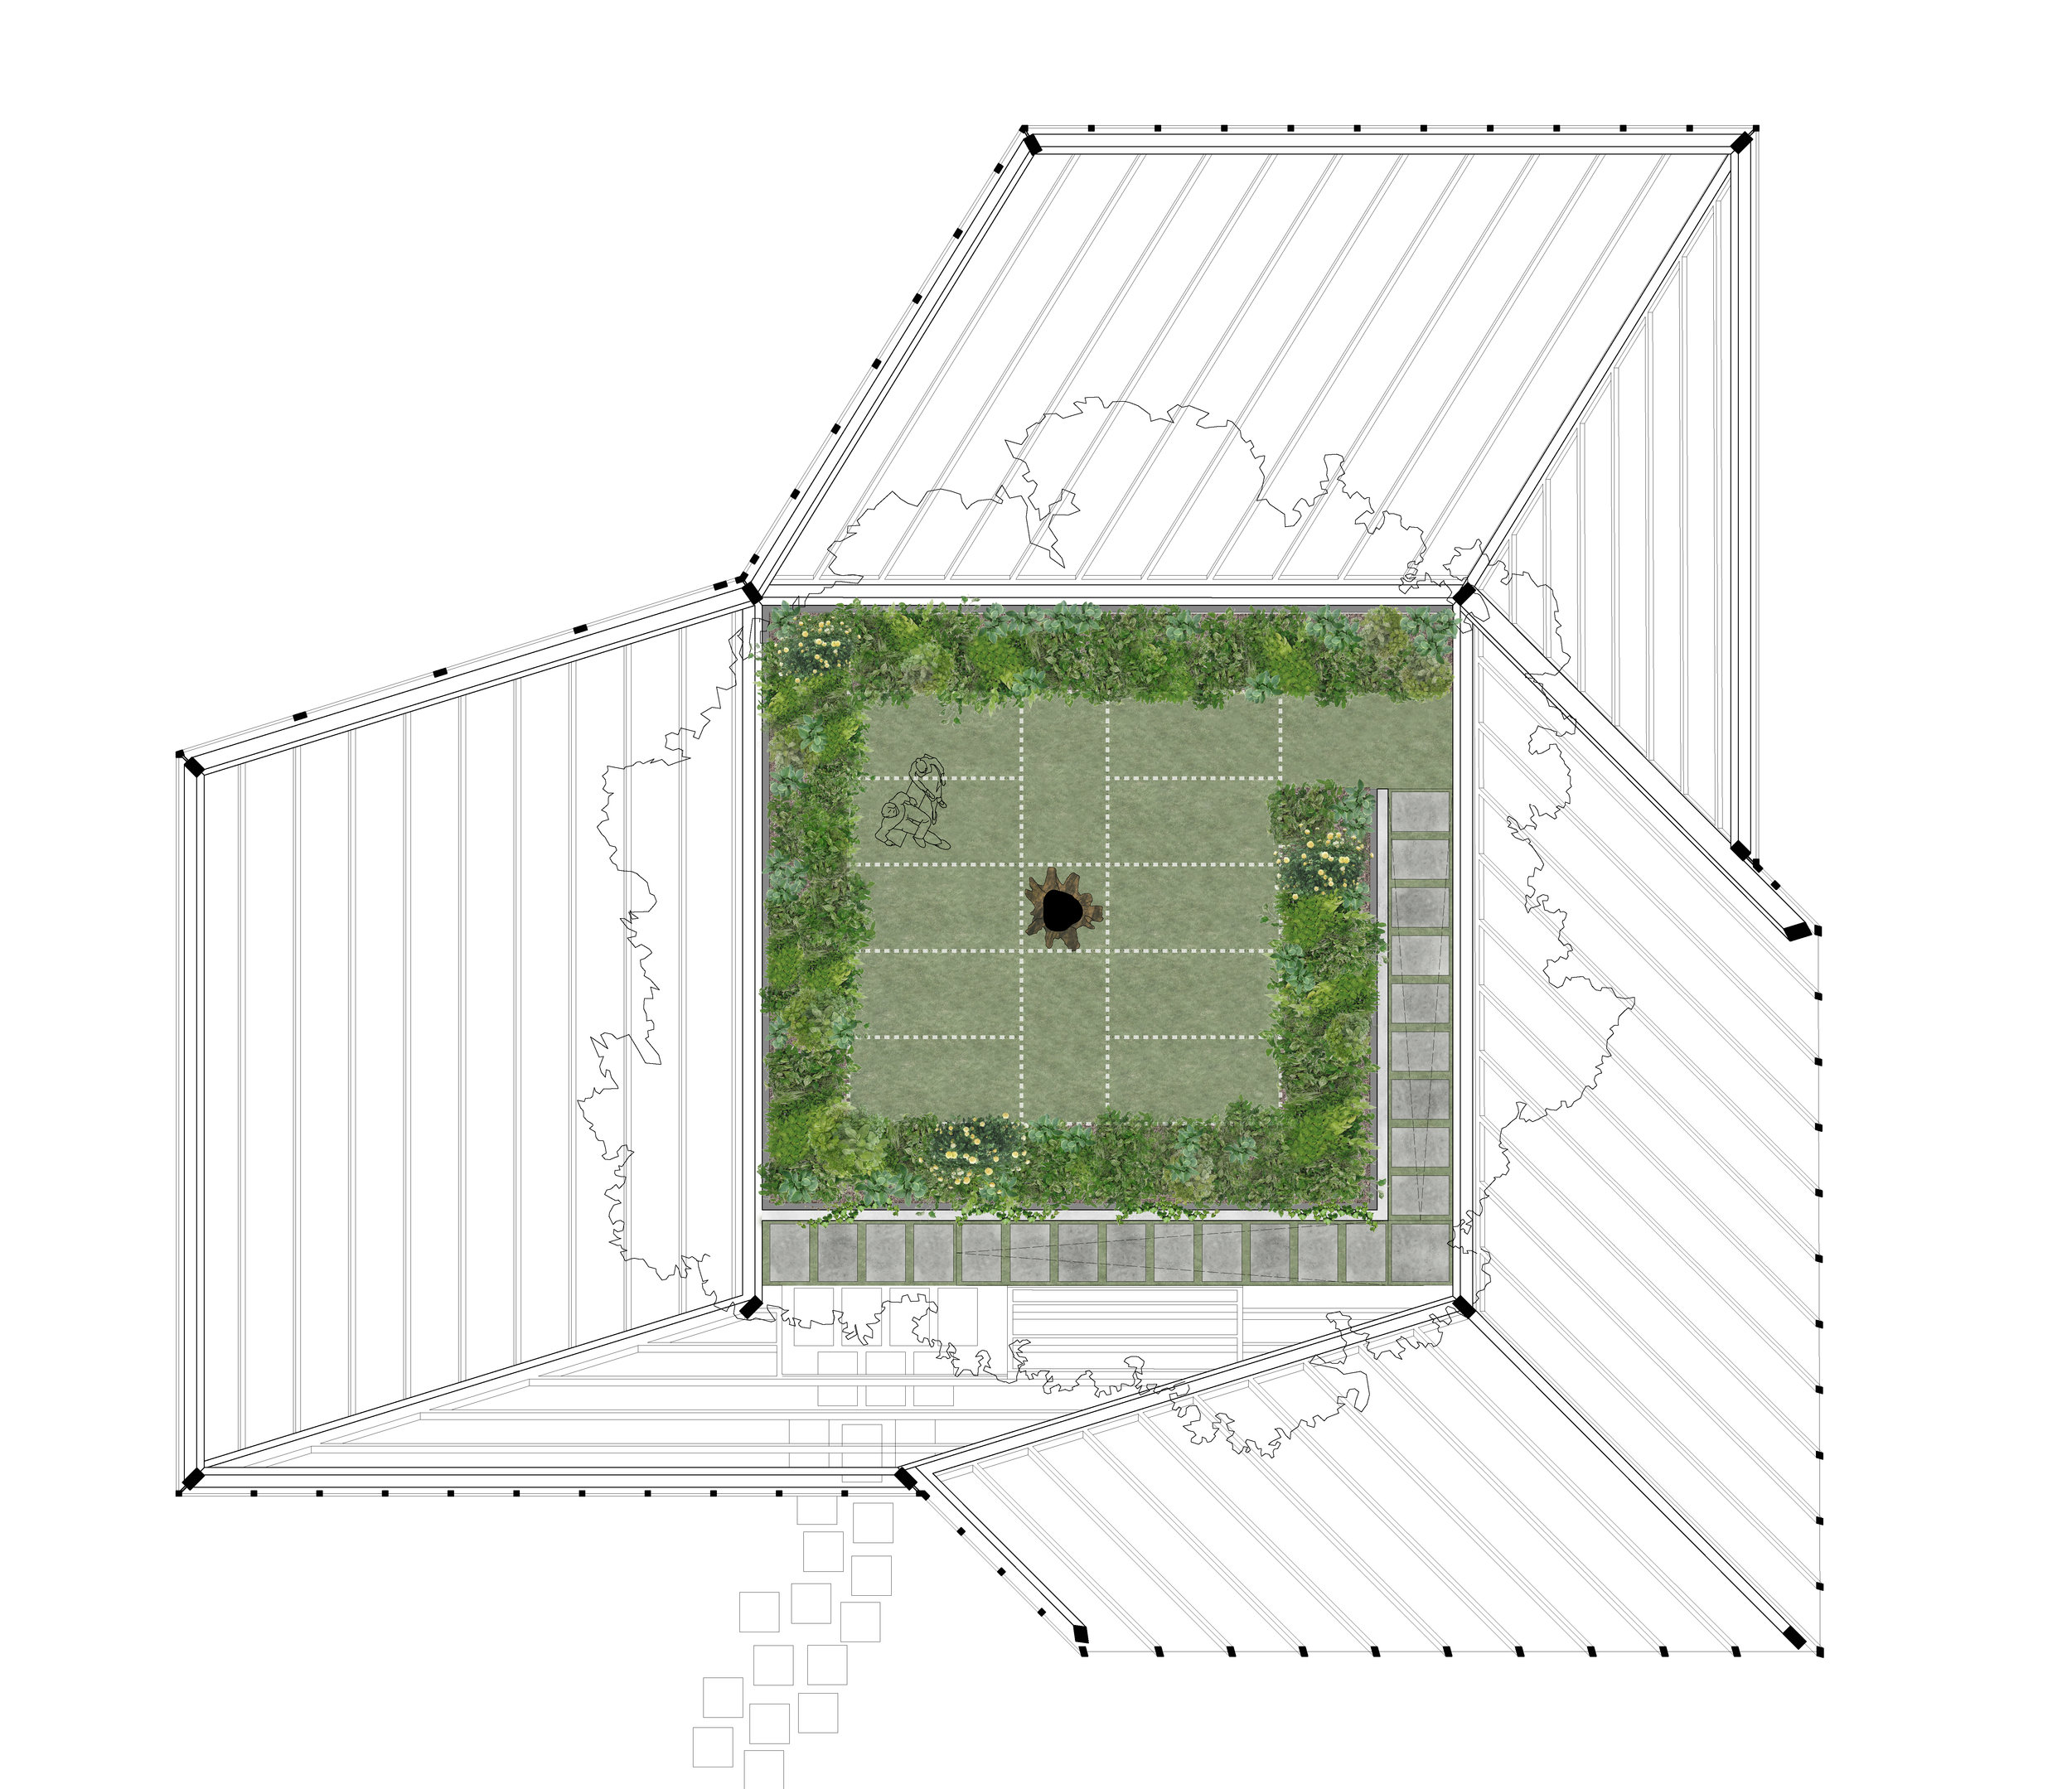  The overlapping tesseracts form a braced moment-frame wood structure to create a large interior volume for the garden and tree to grow in. 